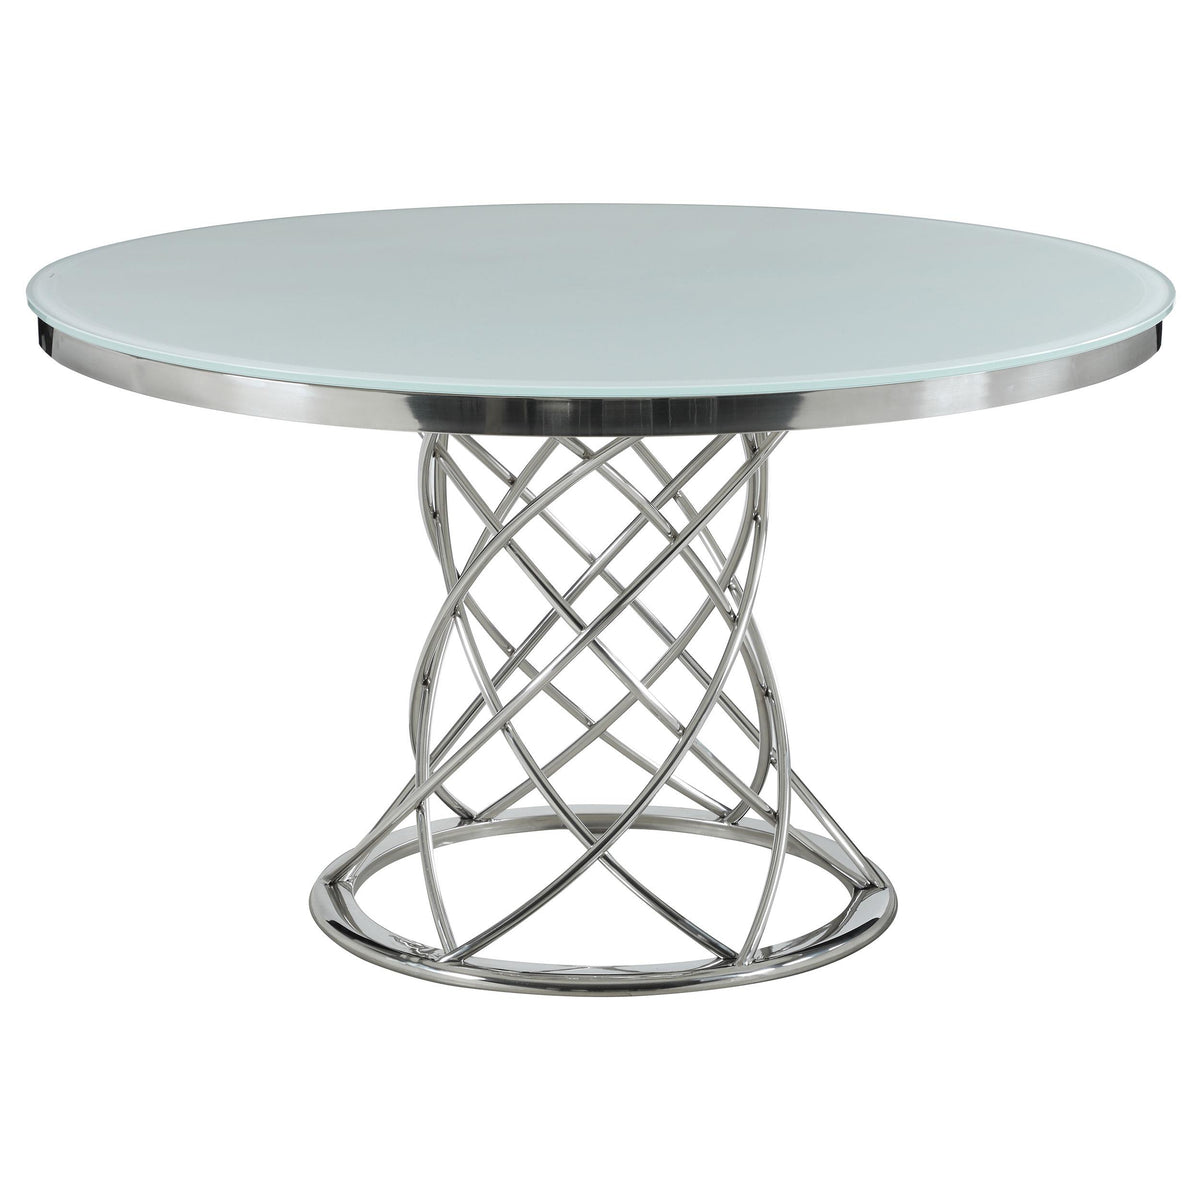 Irene Round Glass Top Dining Table White and Chrome  Half Price Furniture